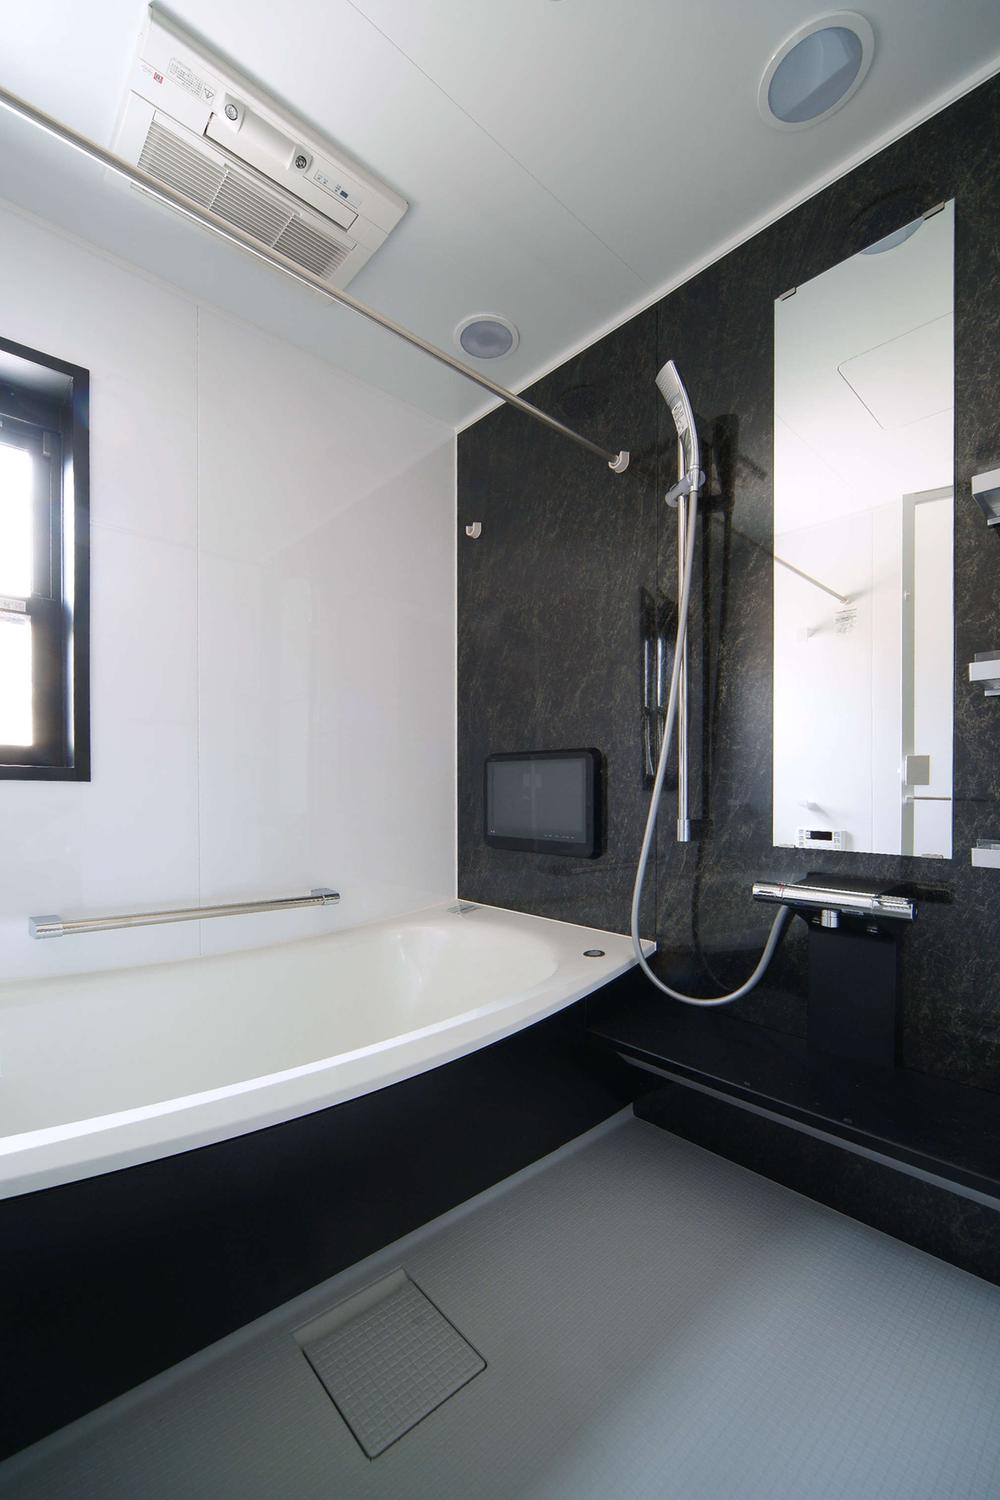 Same specifications photo (bathroom). Bathroom packed with beauty and health and healing of the equipment. (Our example of construction)